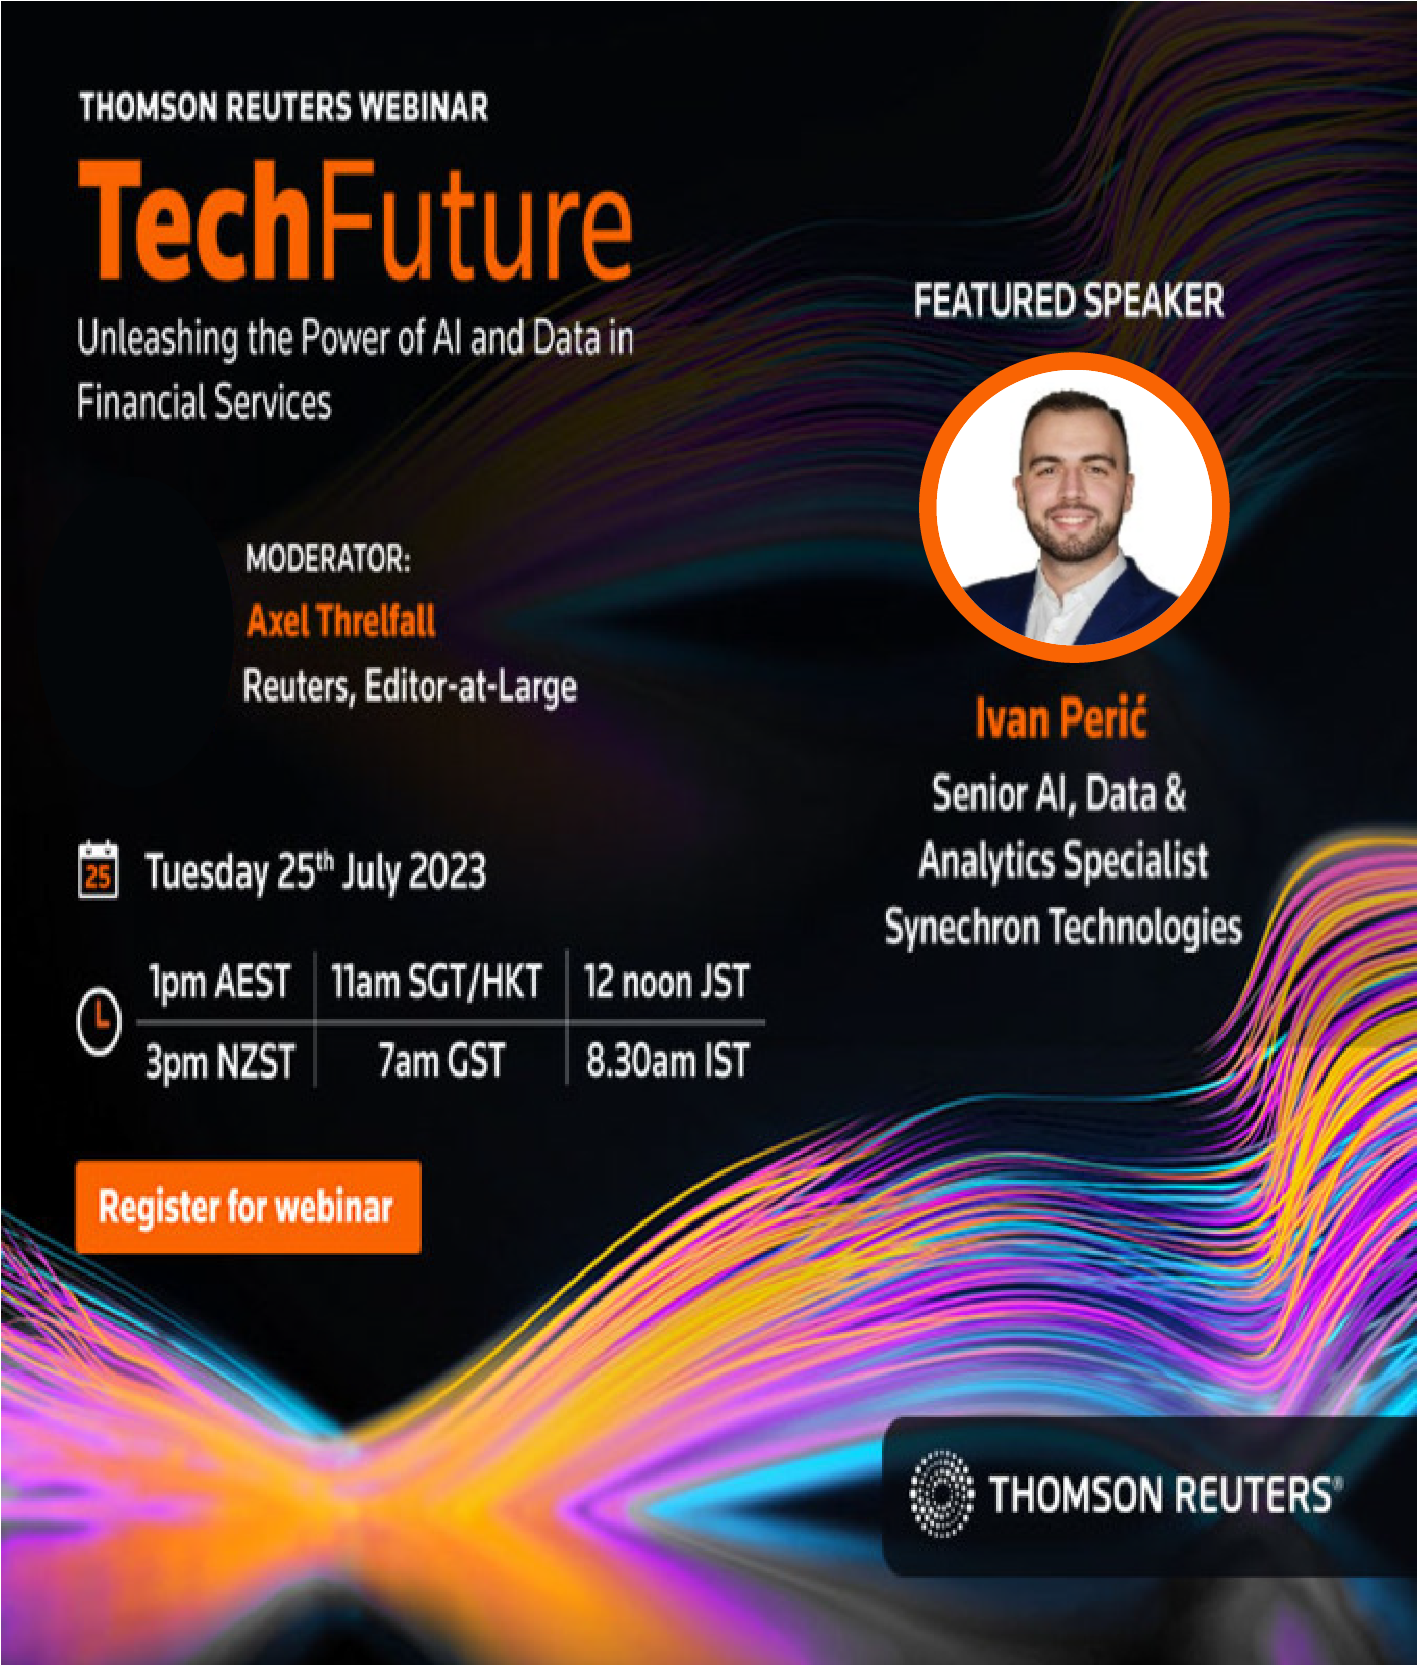  Thomas Reuters Webinar: TechFuture: Unleashing the Power of AI and Data in Financial Services -1